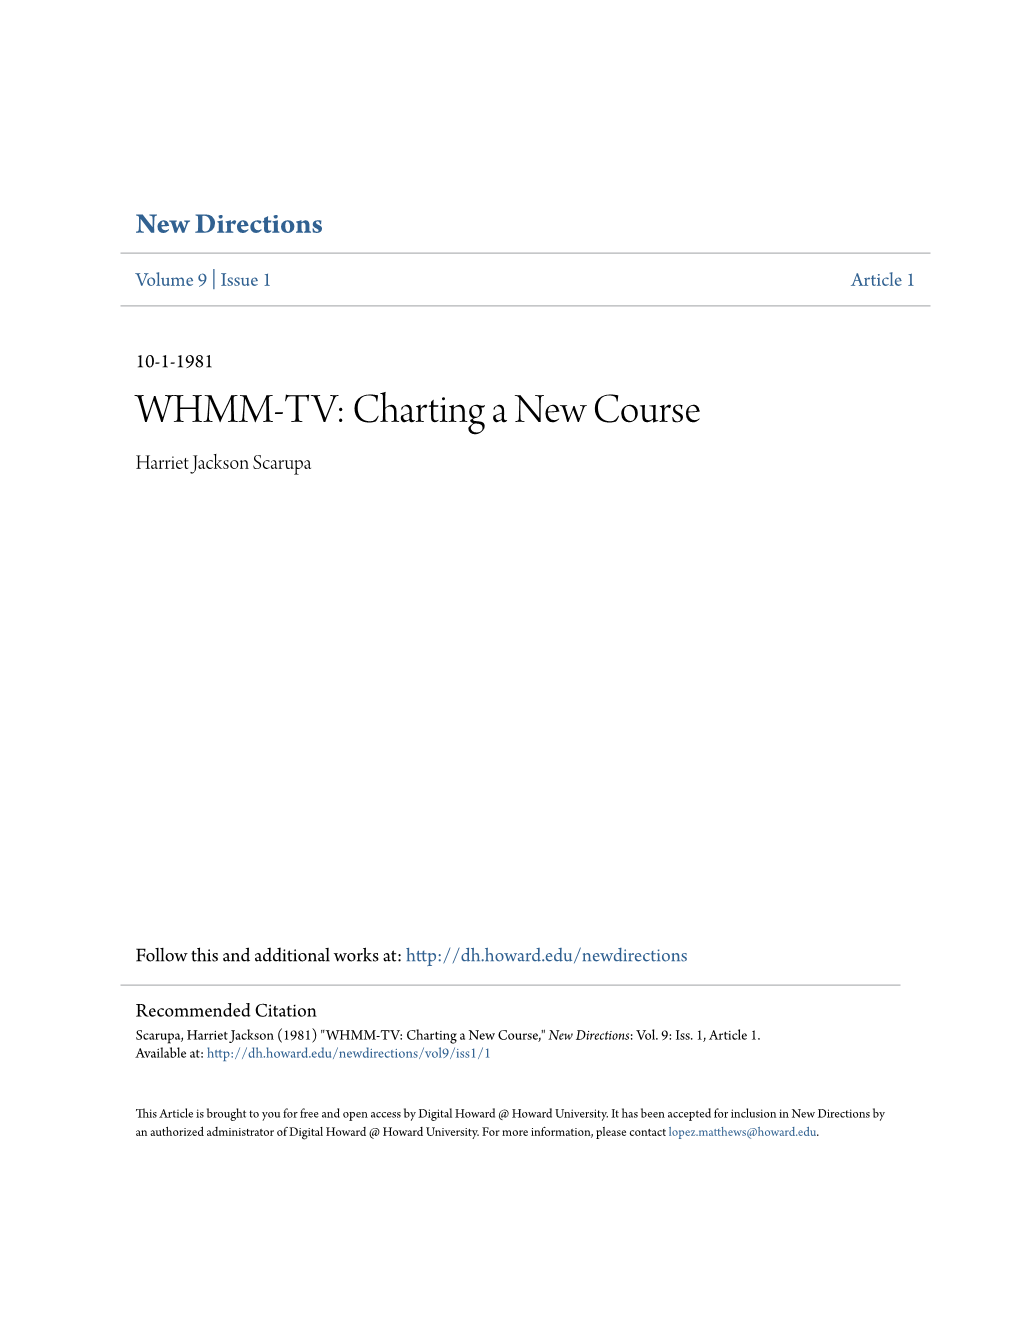 WHMM-TV: Charting a New Course Harriet Jackson Scarupa